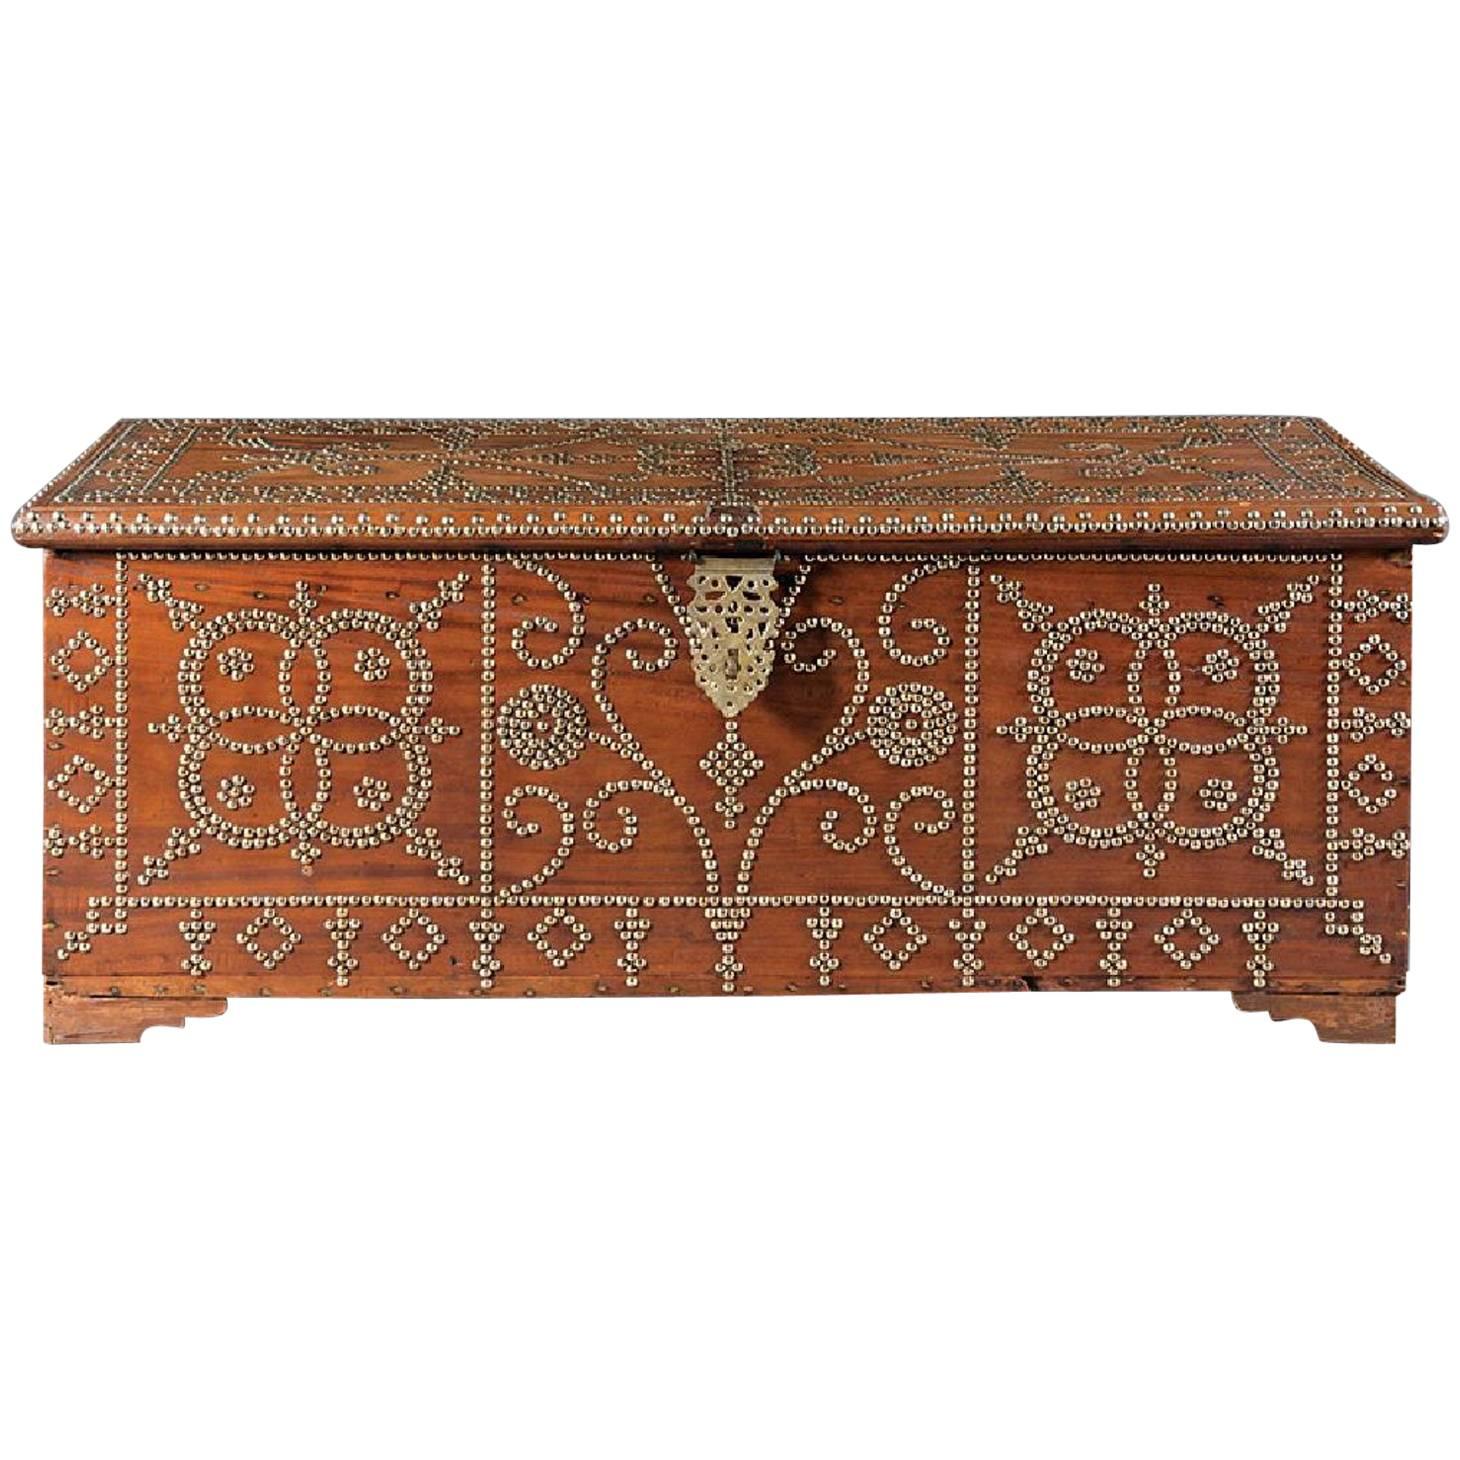 Antique Spanish Colonial-Style Hardwood Chest